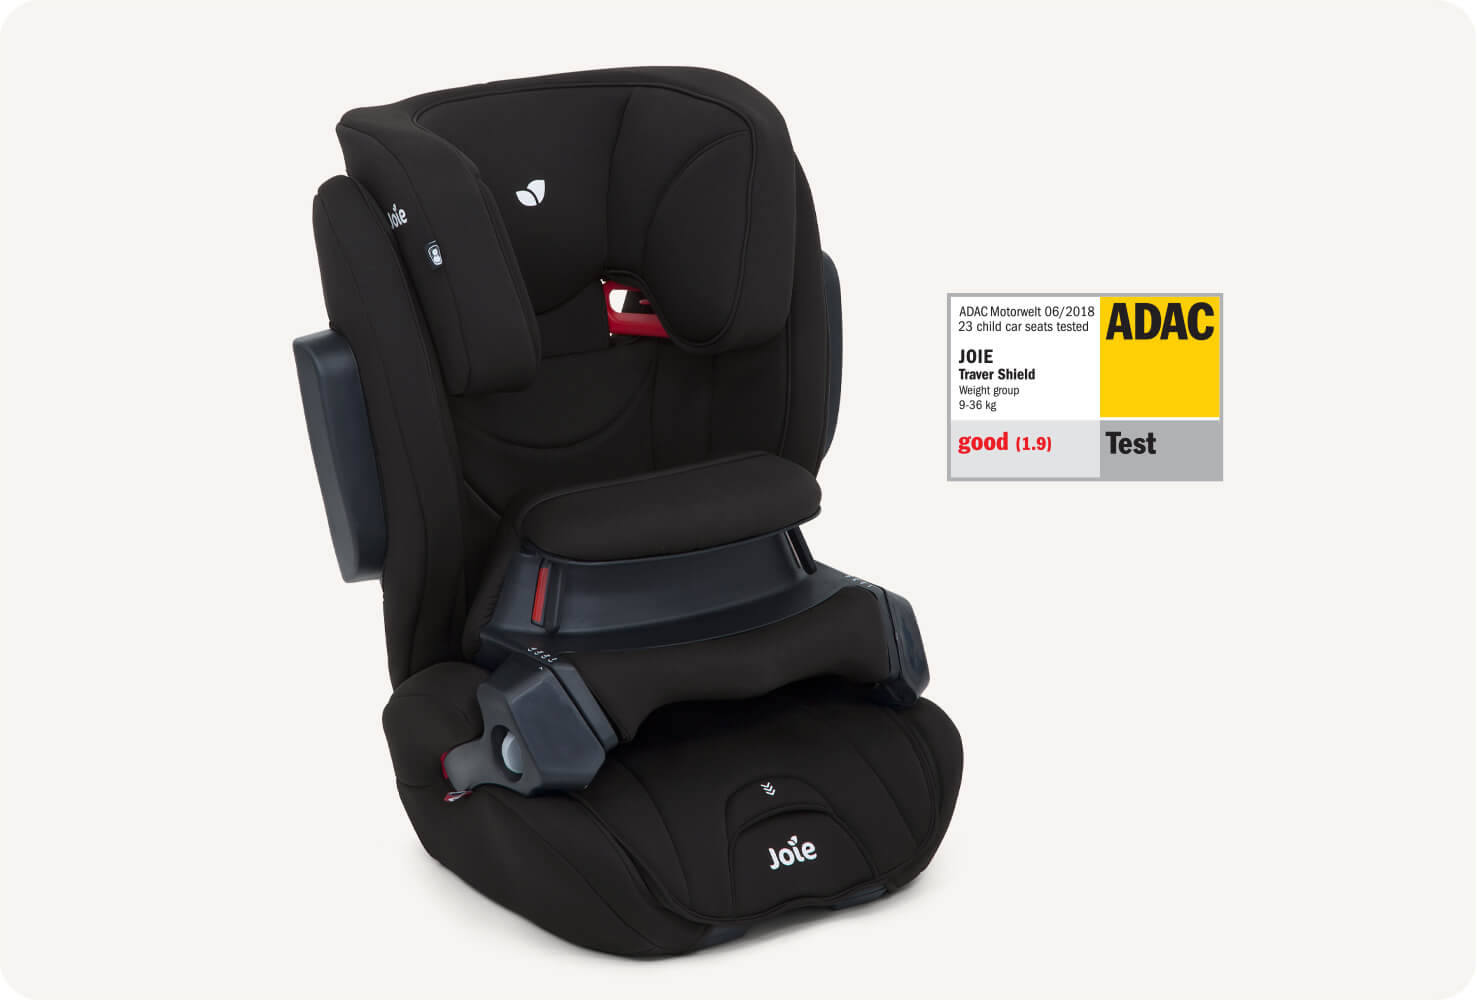 A black traver shield booster car seat facing at a right angle alongside the ADAC test label.